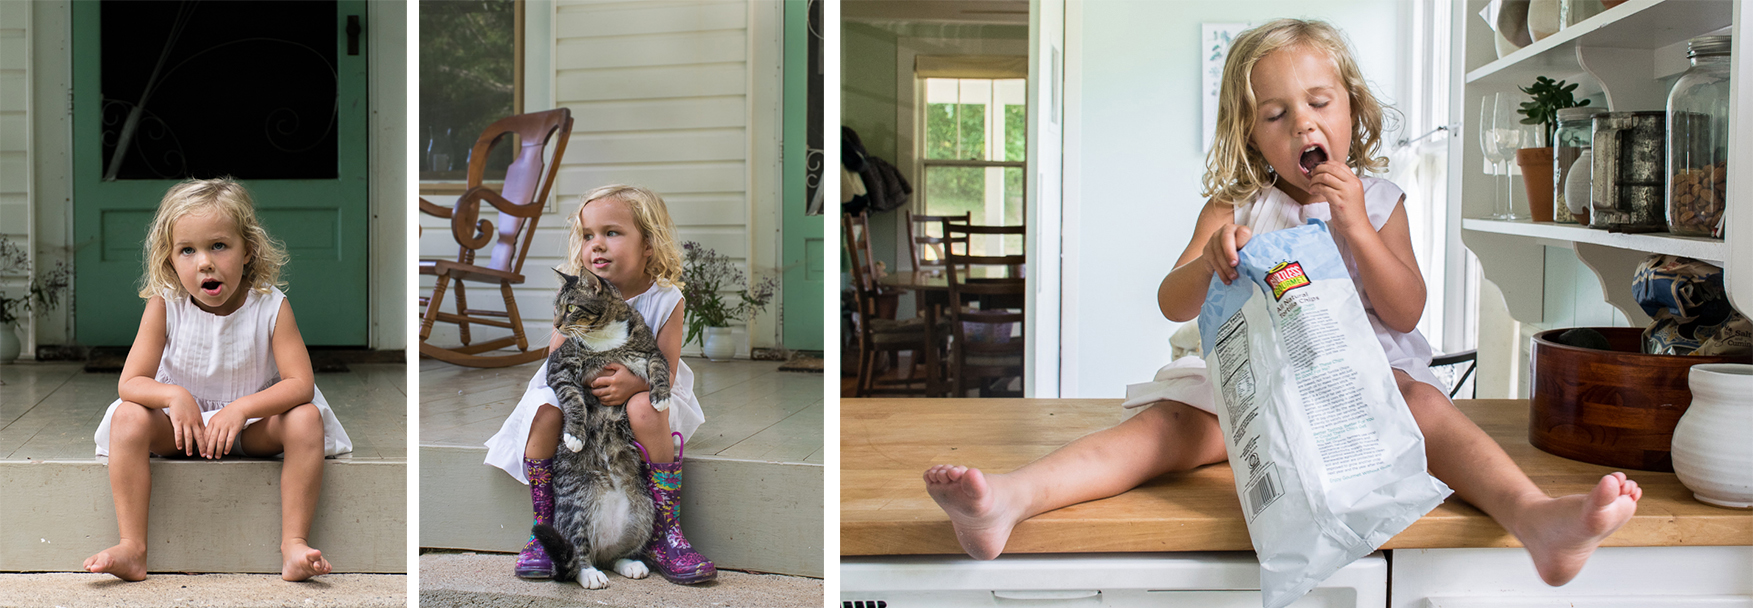 Collage of a small girl playing at her farm house with her cat.